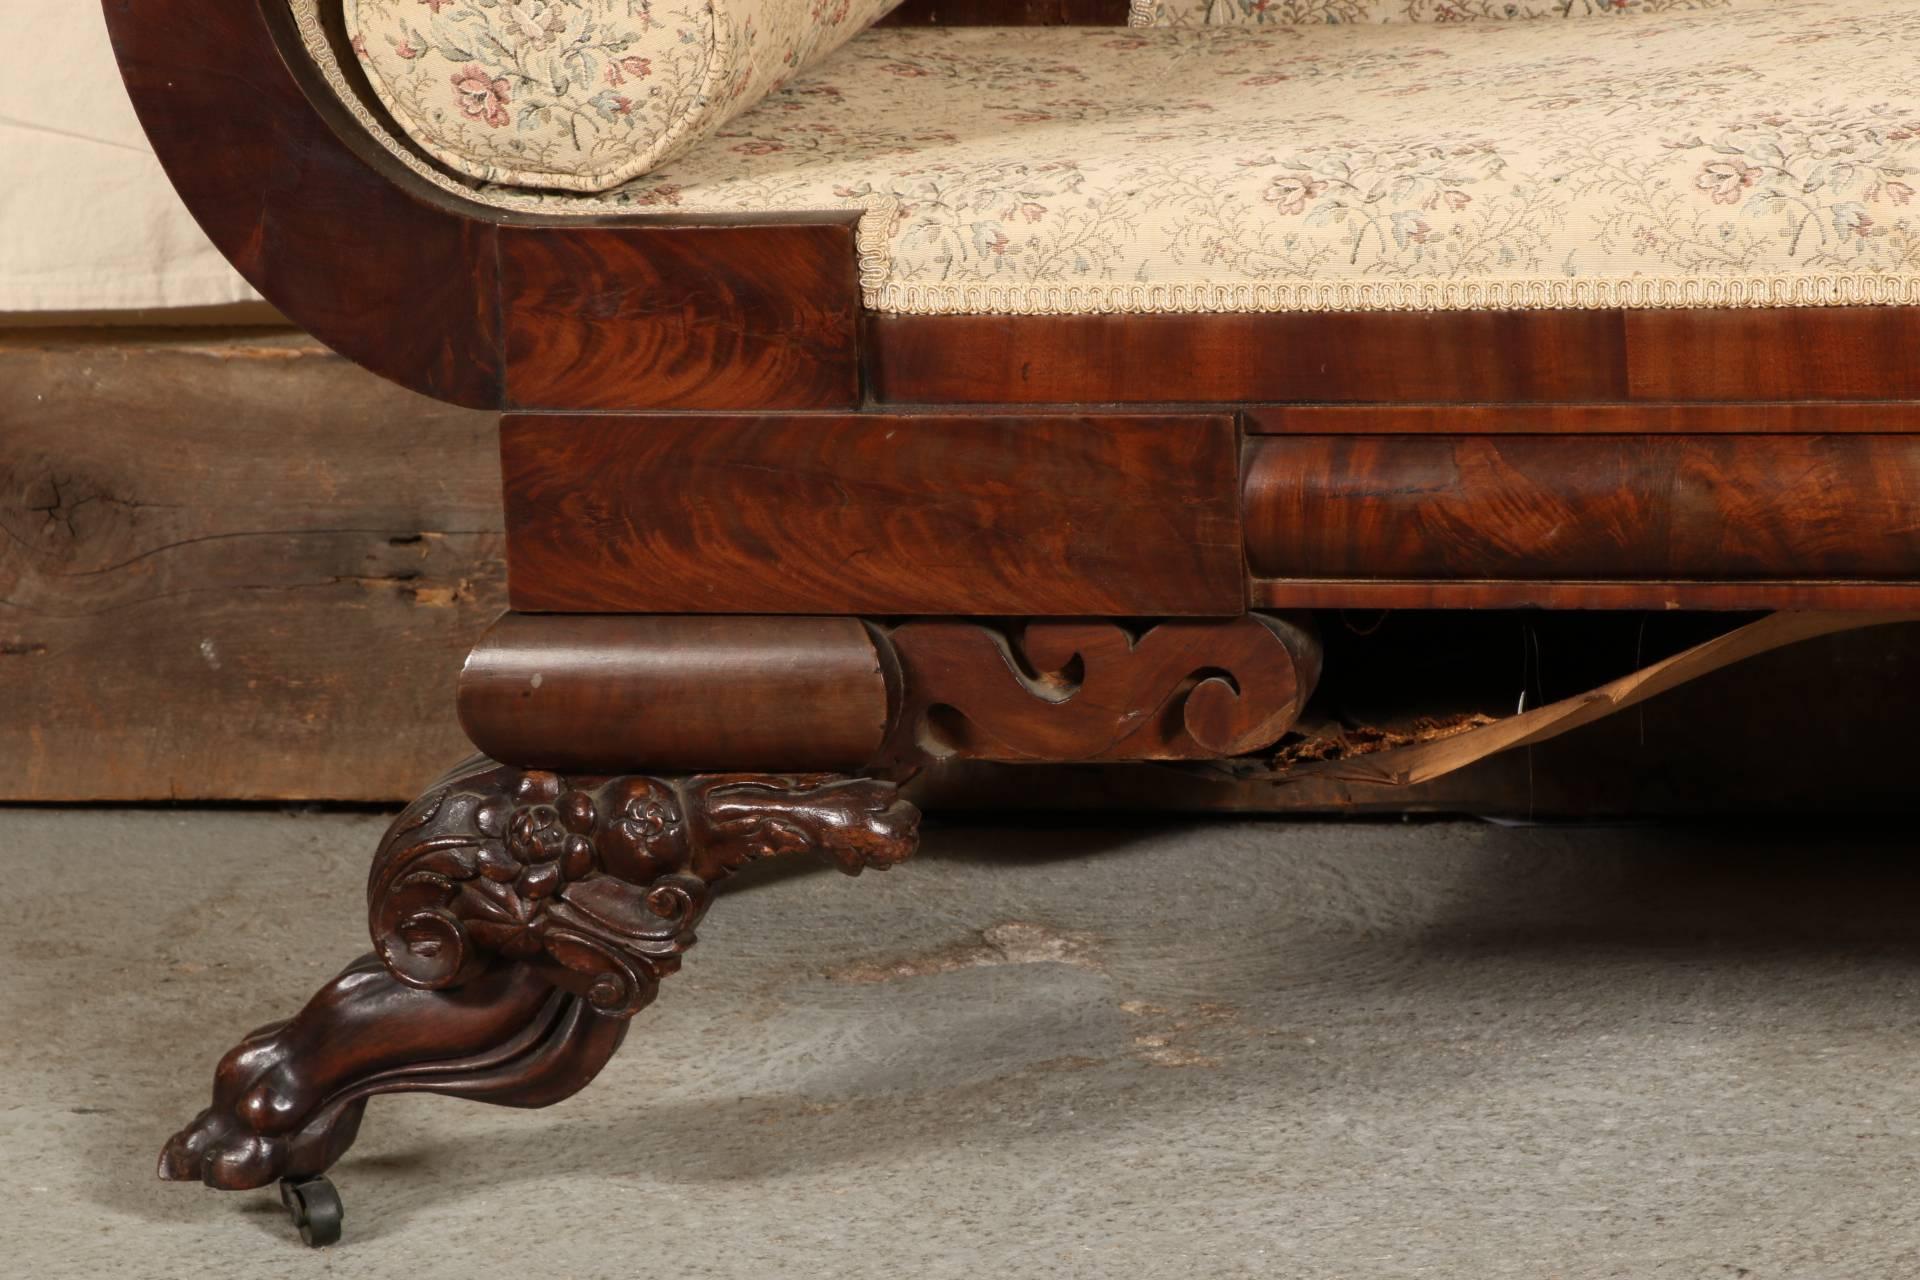 Burled wood frame with exaggerated scrolled back and arms. The crest rail carved with acanthus leaves, and raised on heavy carved lion's paw legs with scrolled foliate decoration. On casters.
Condition: Bottom of the sofa will have to be re-sprung.